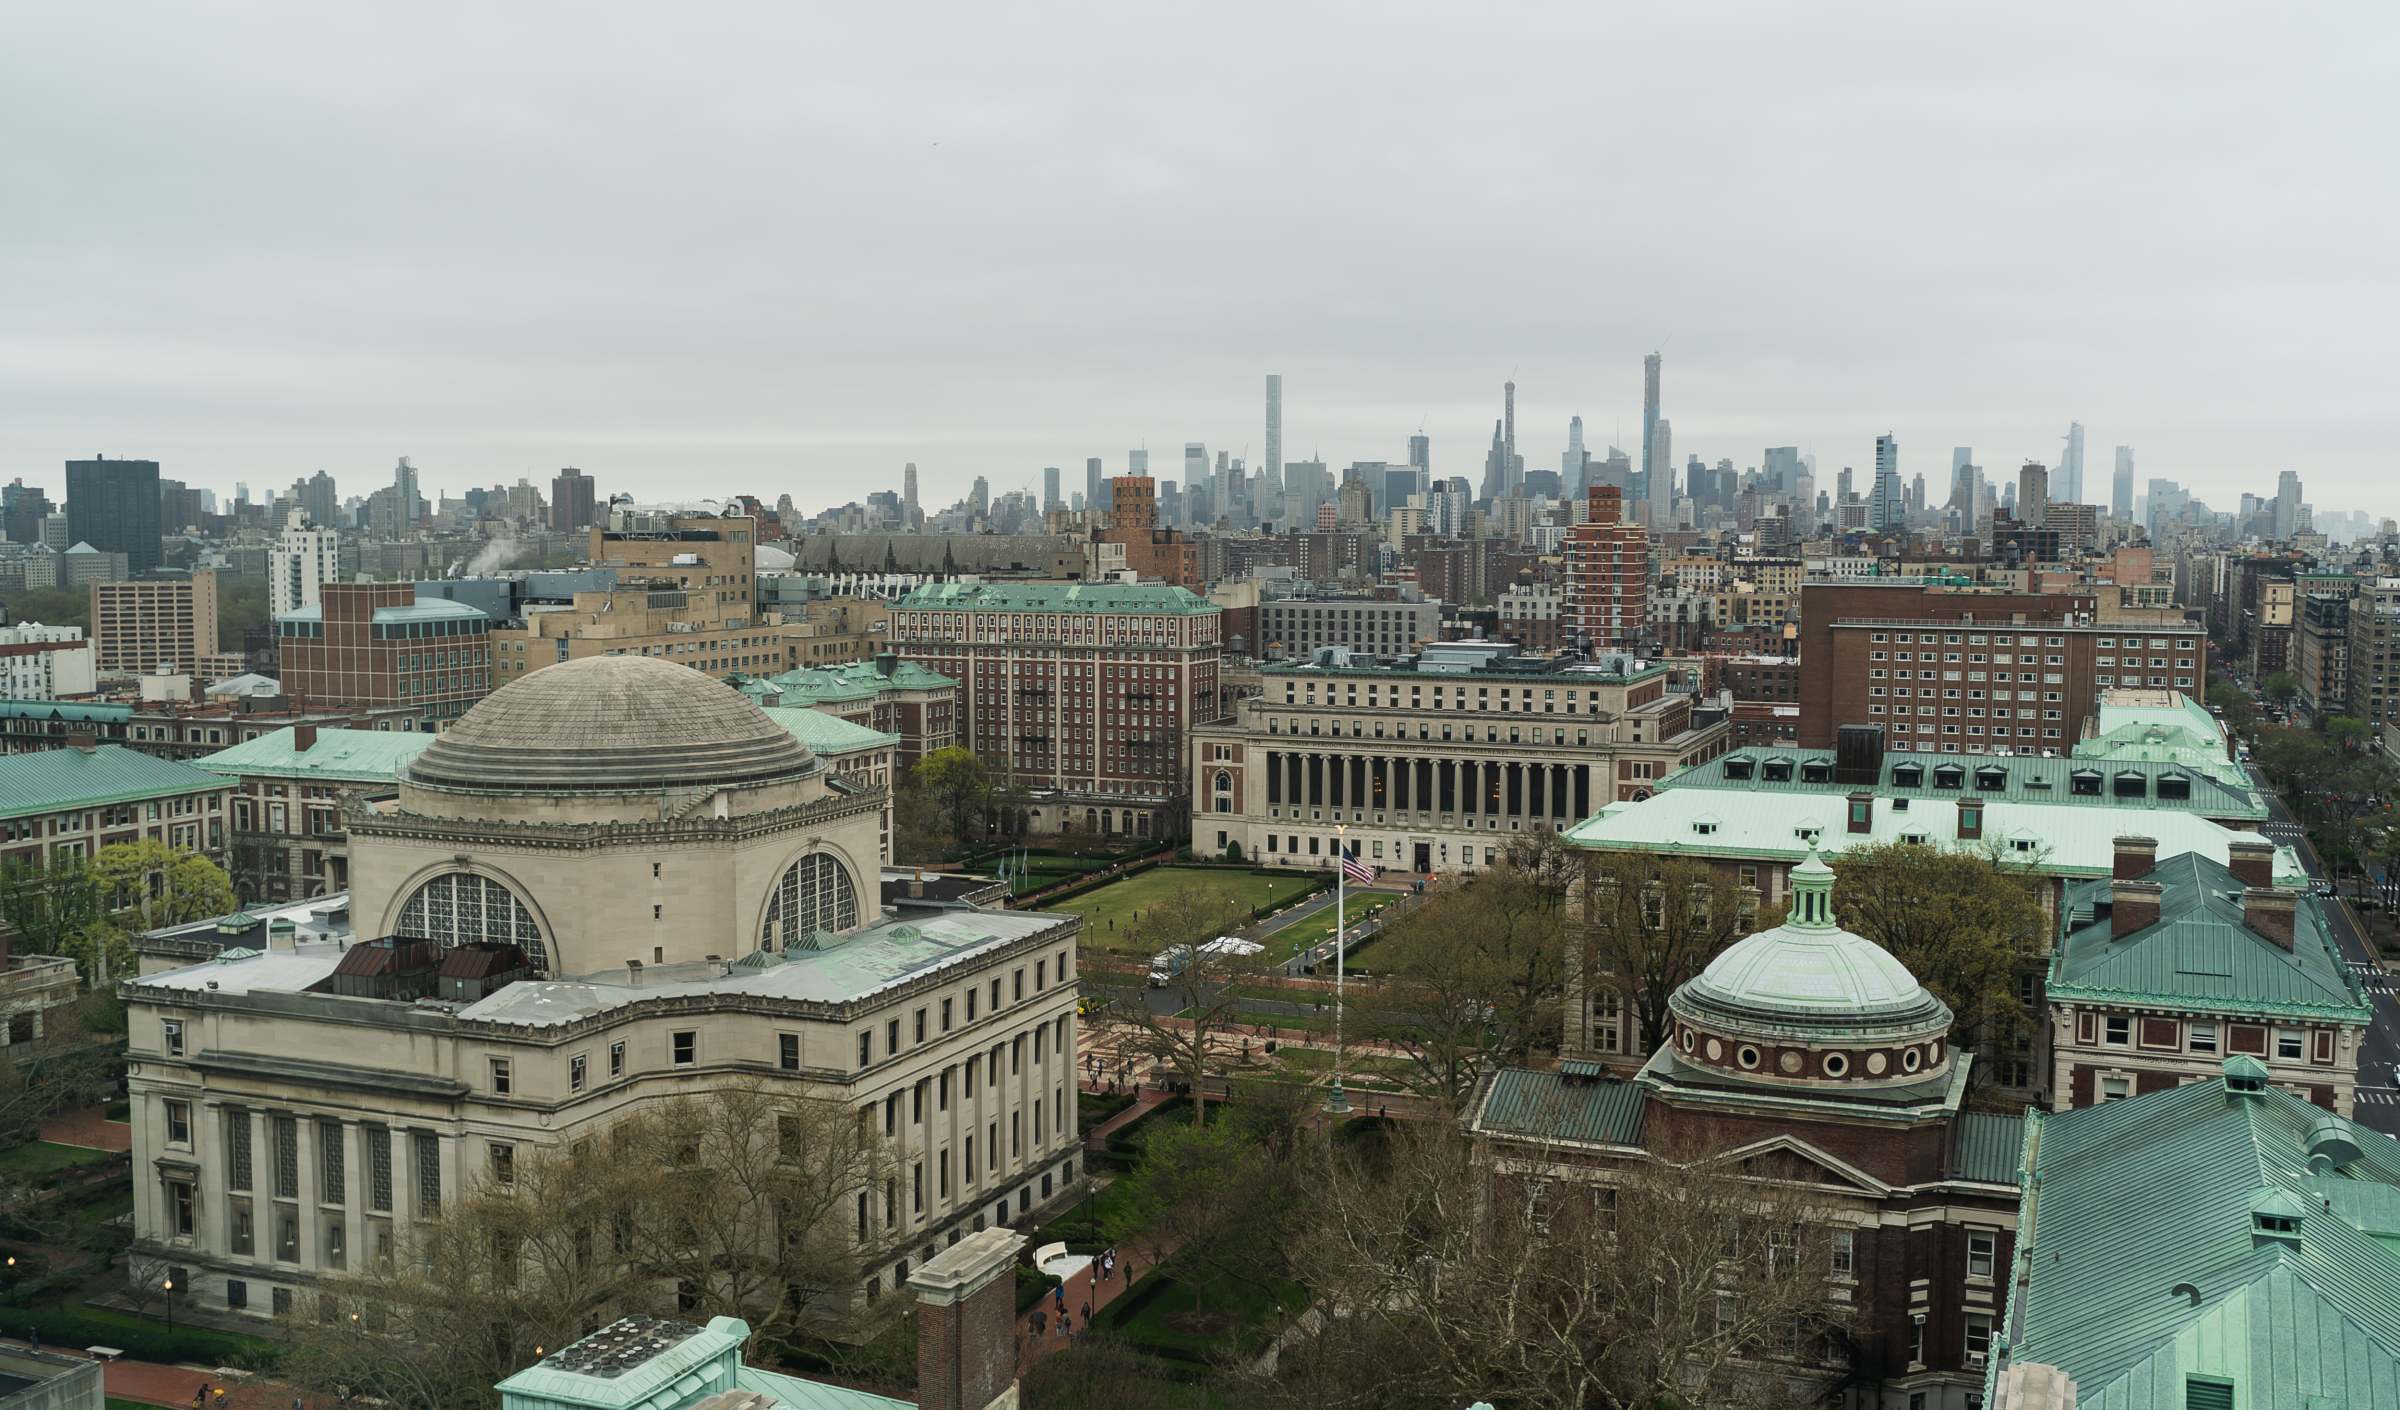 view of New York City from campus